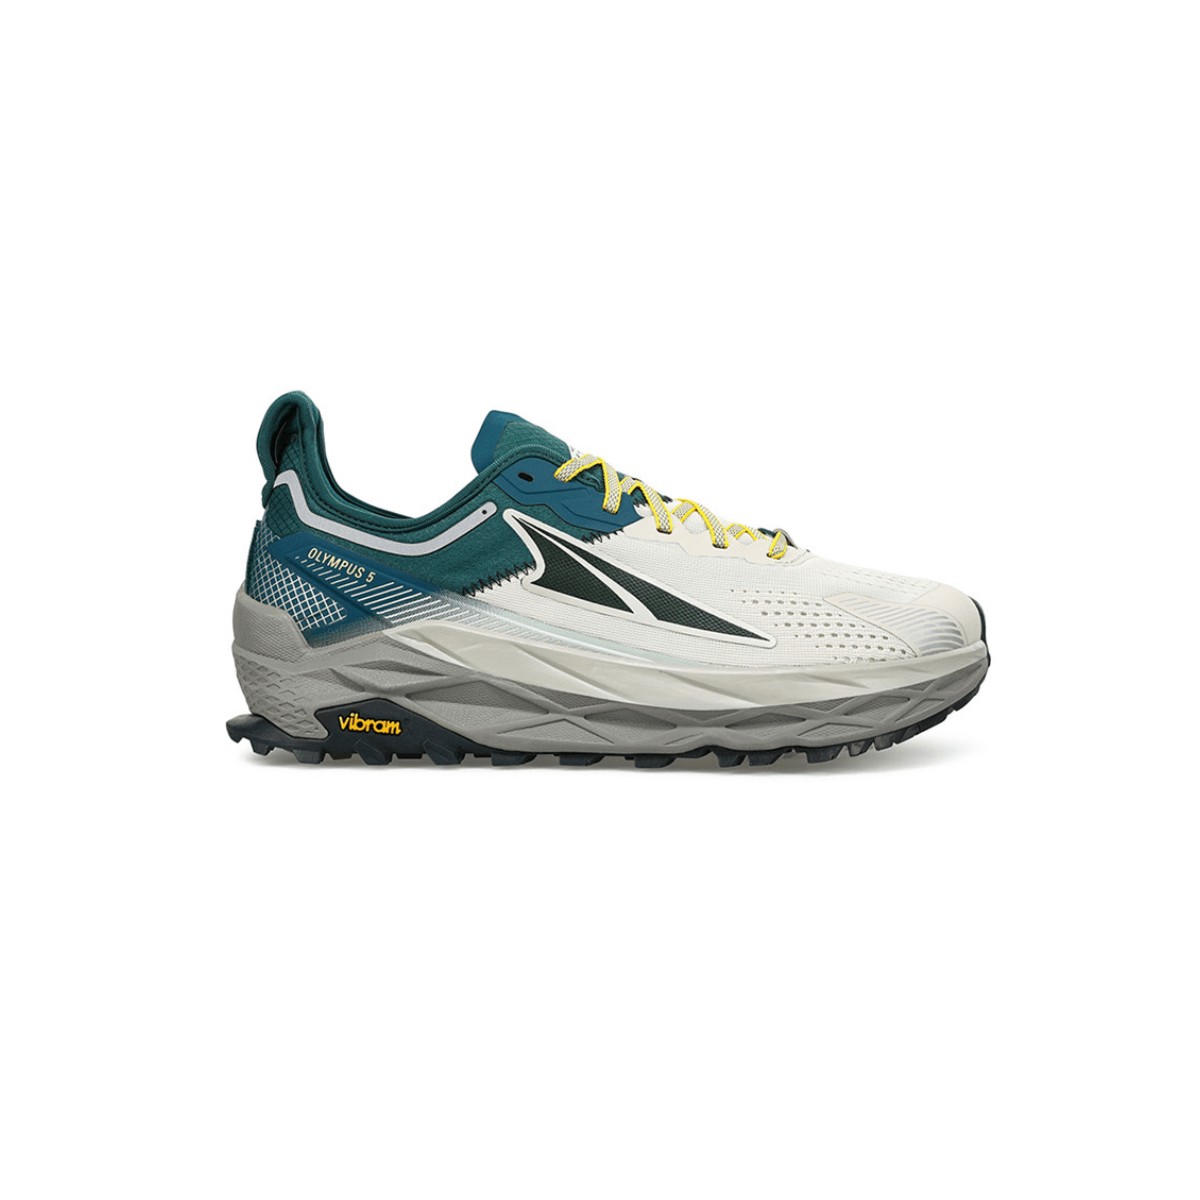 Altra Olympus 5.0 White Gray Running Shoes AW22, Size 42 - EUR